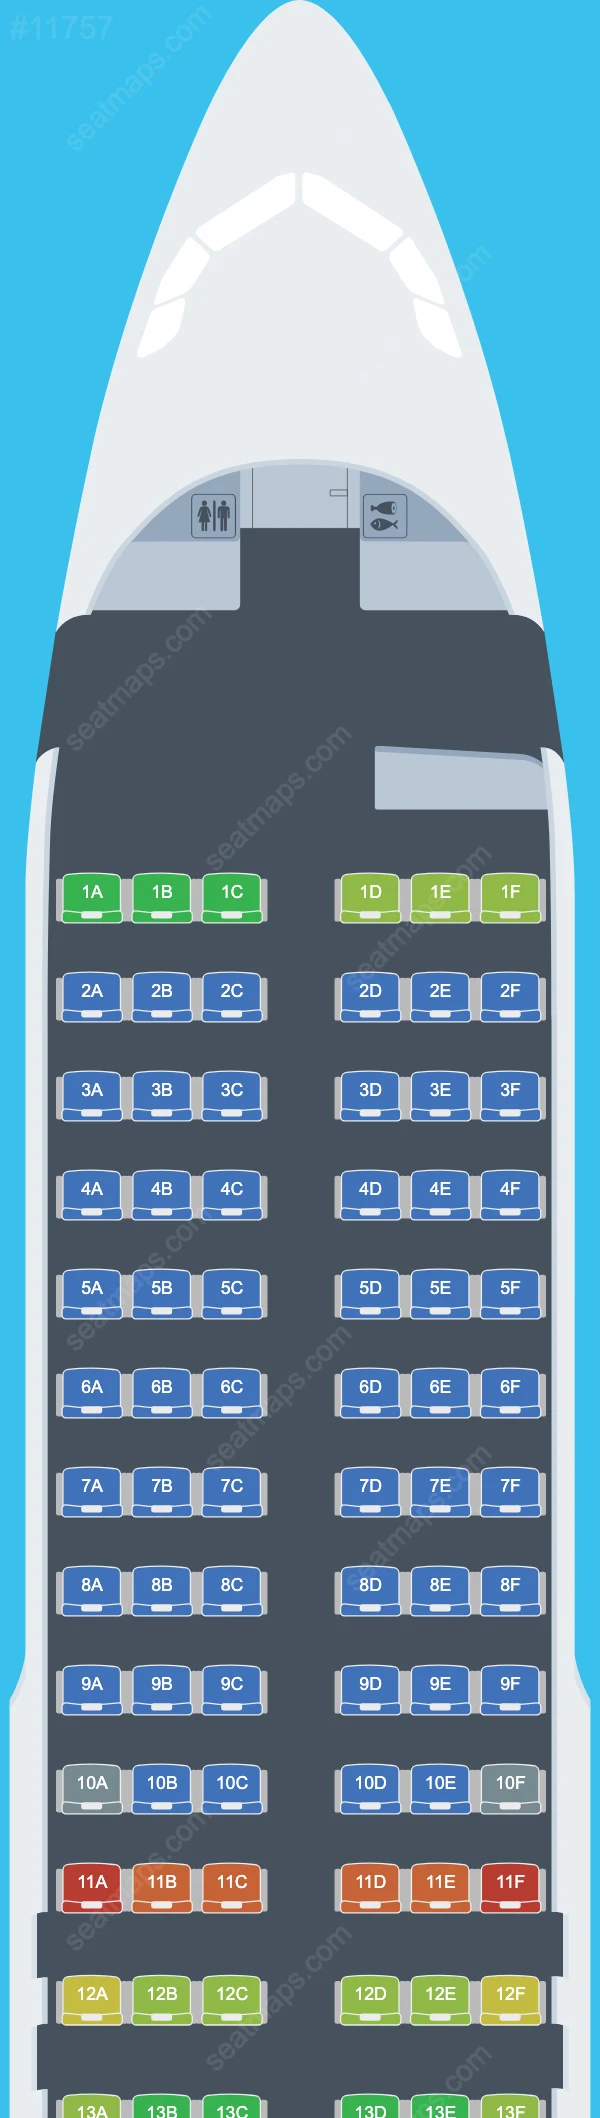 LATAM Airlines Airbus A320 aircraft seat map  A320-200 V.4